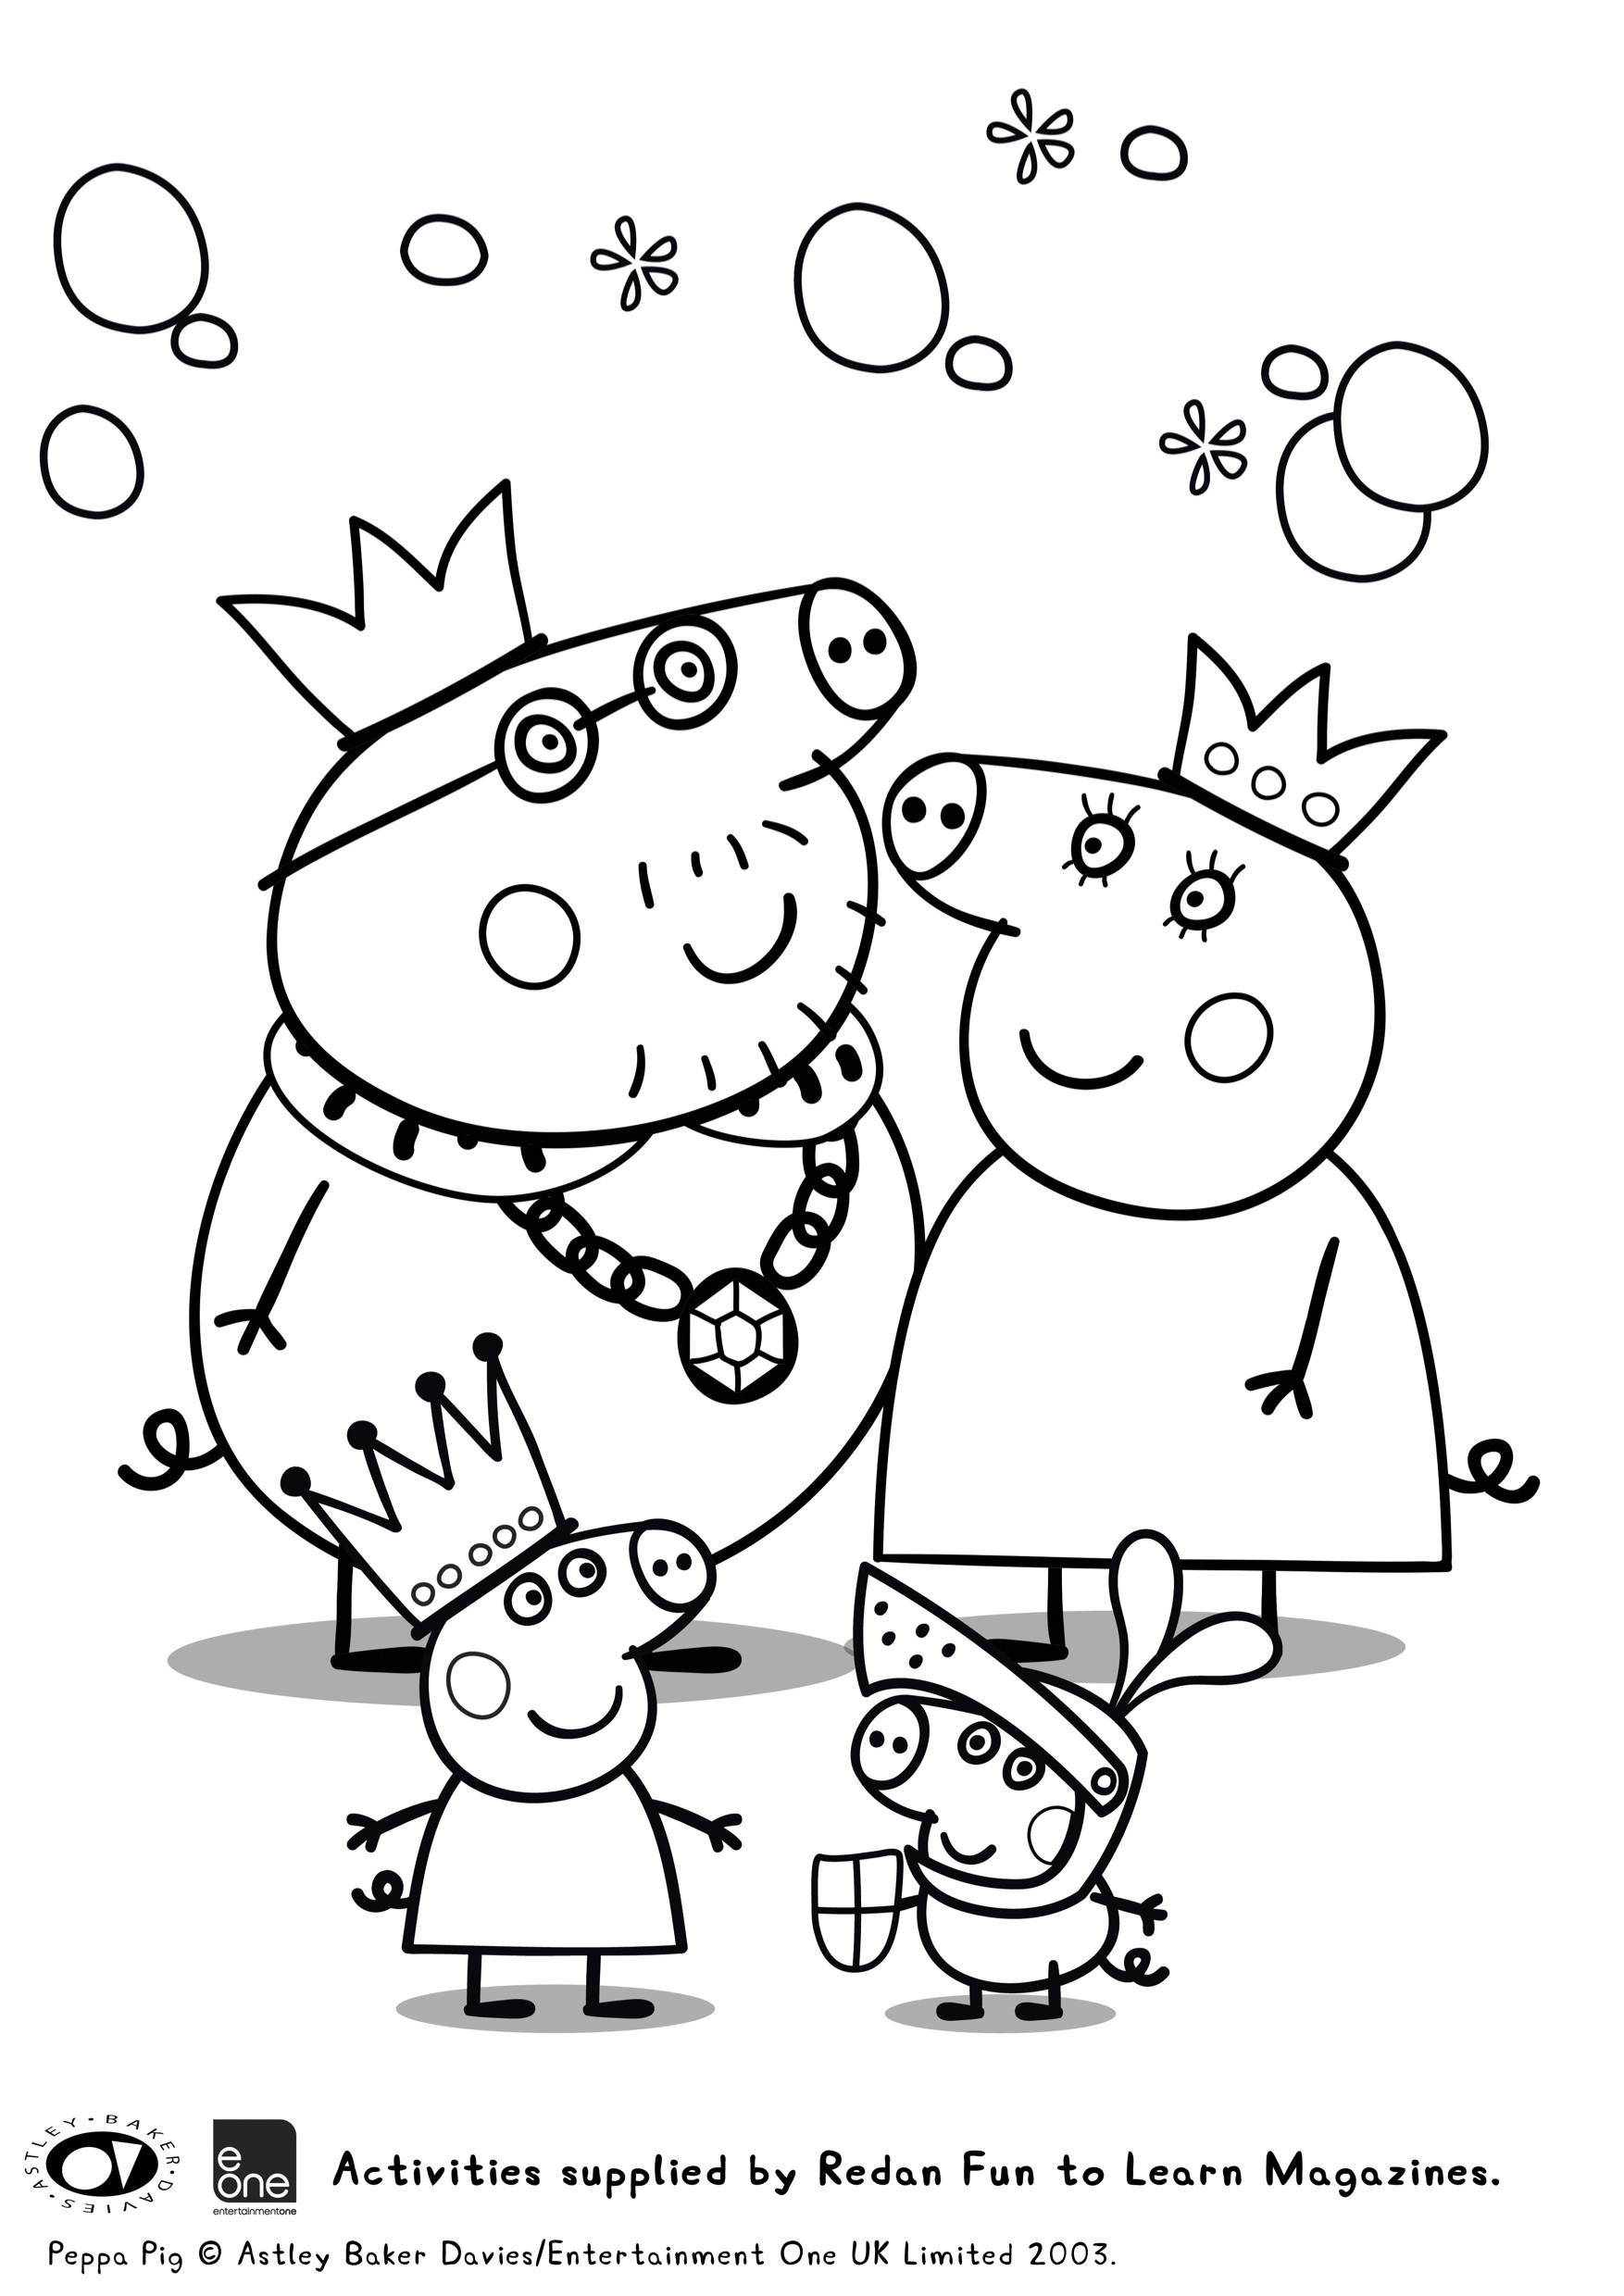 Download your FREE Peppa Pig Colouring In Pages